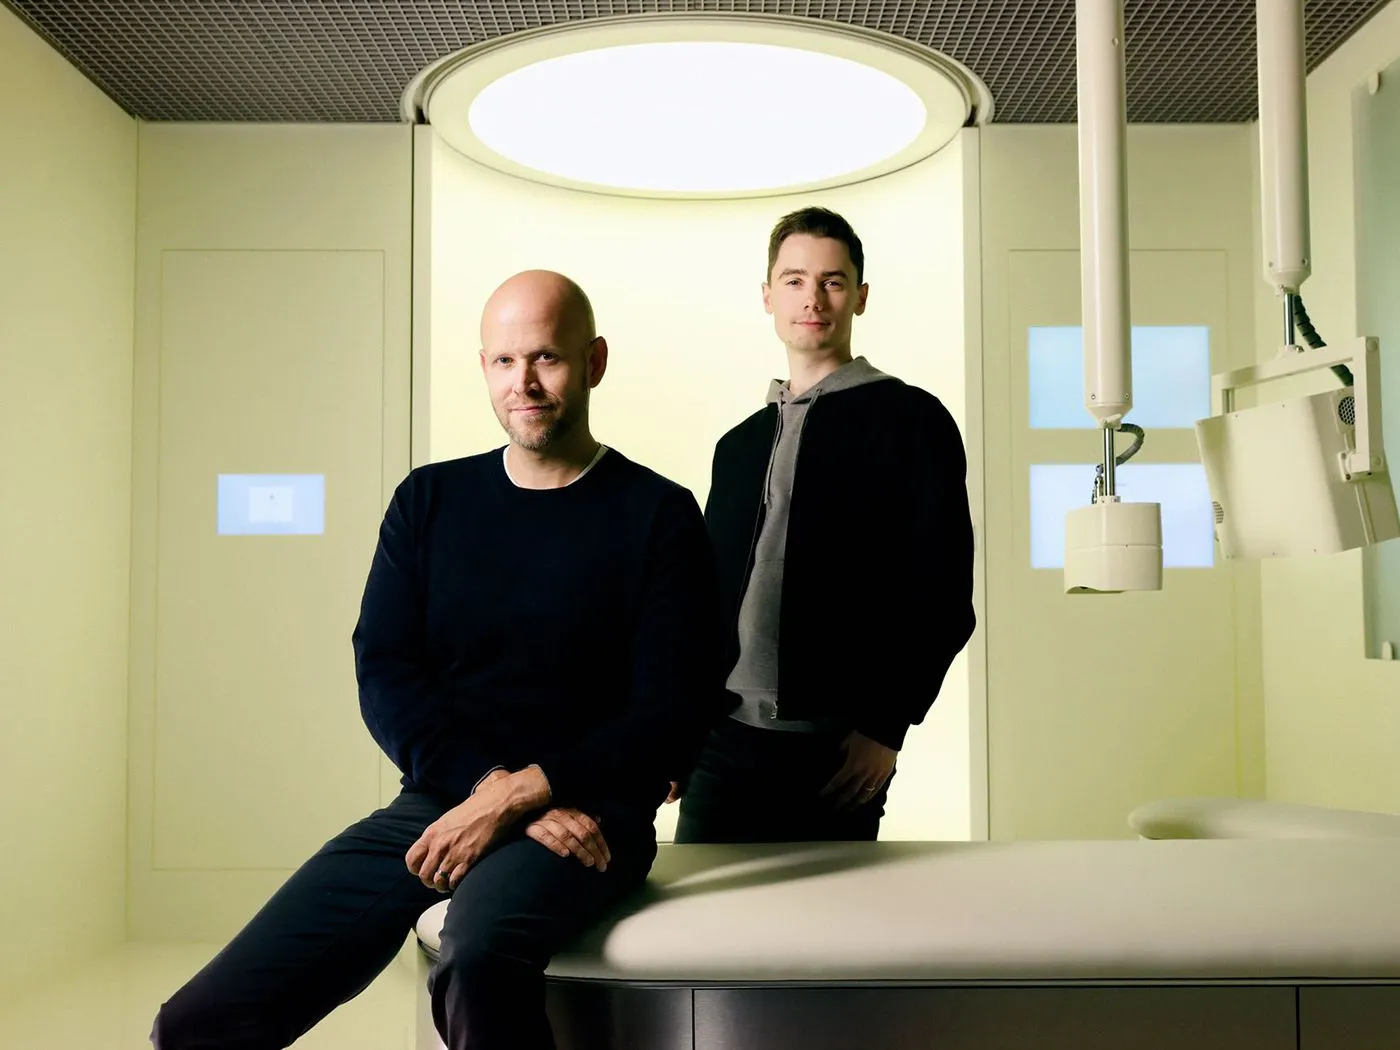 Daniel Ek, the founder of Spotify, has ventured into the healthcare industry, and launched a new startup called ‘Neko Health.’